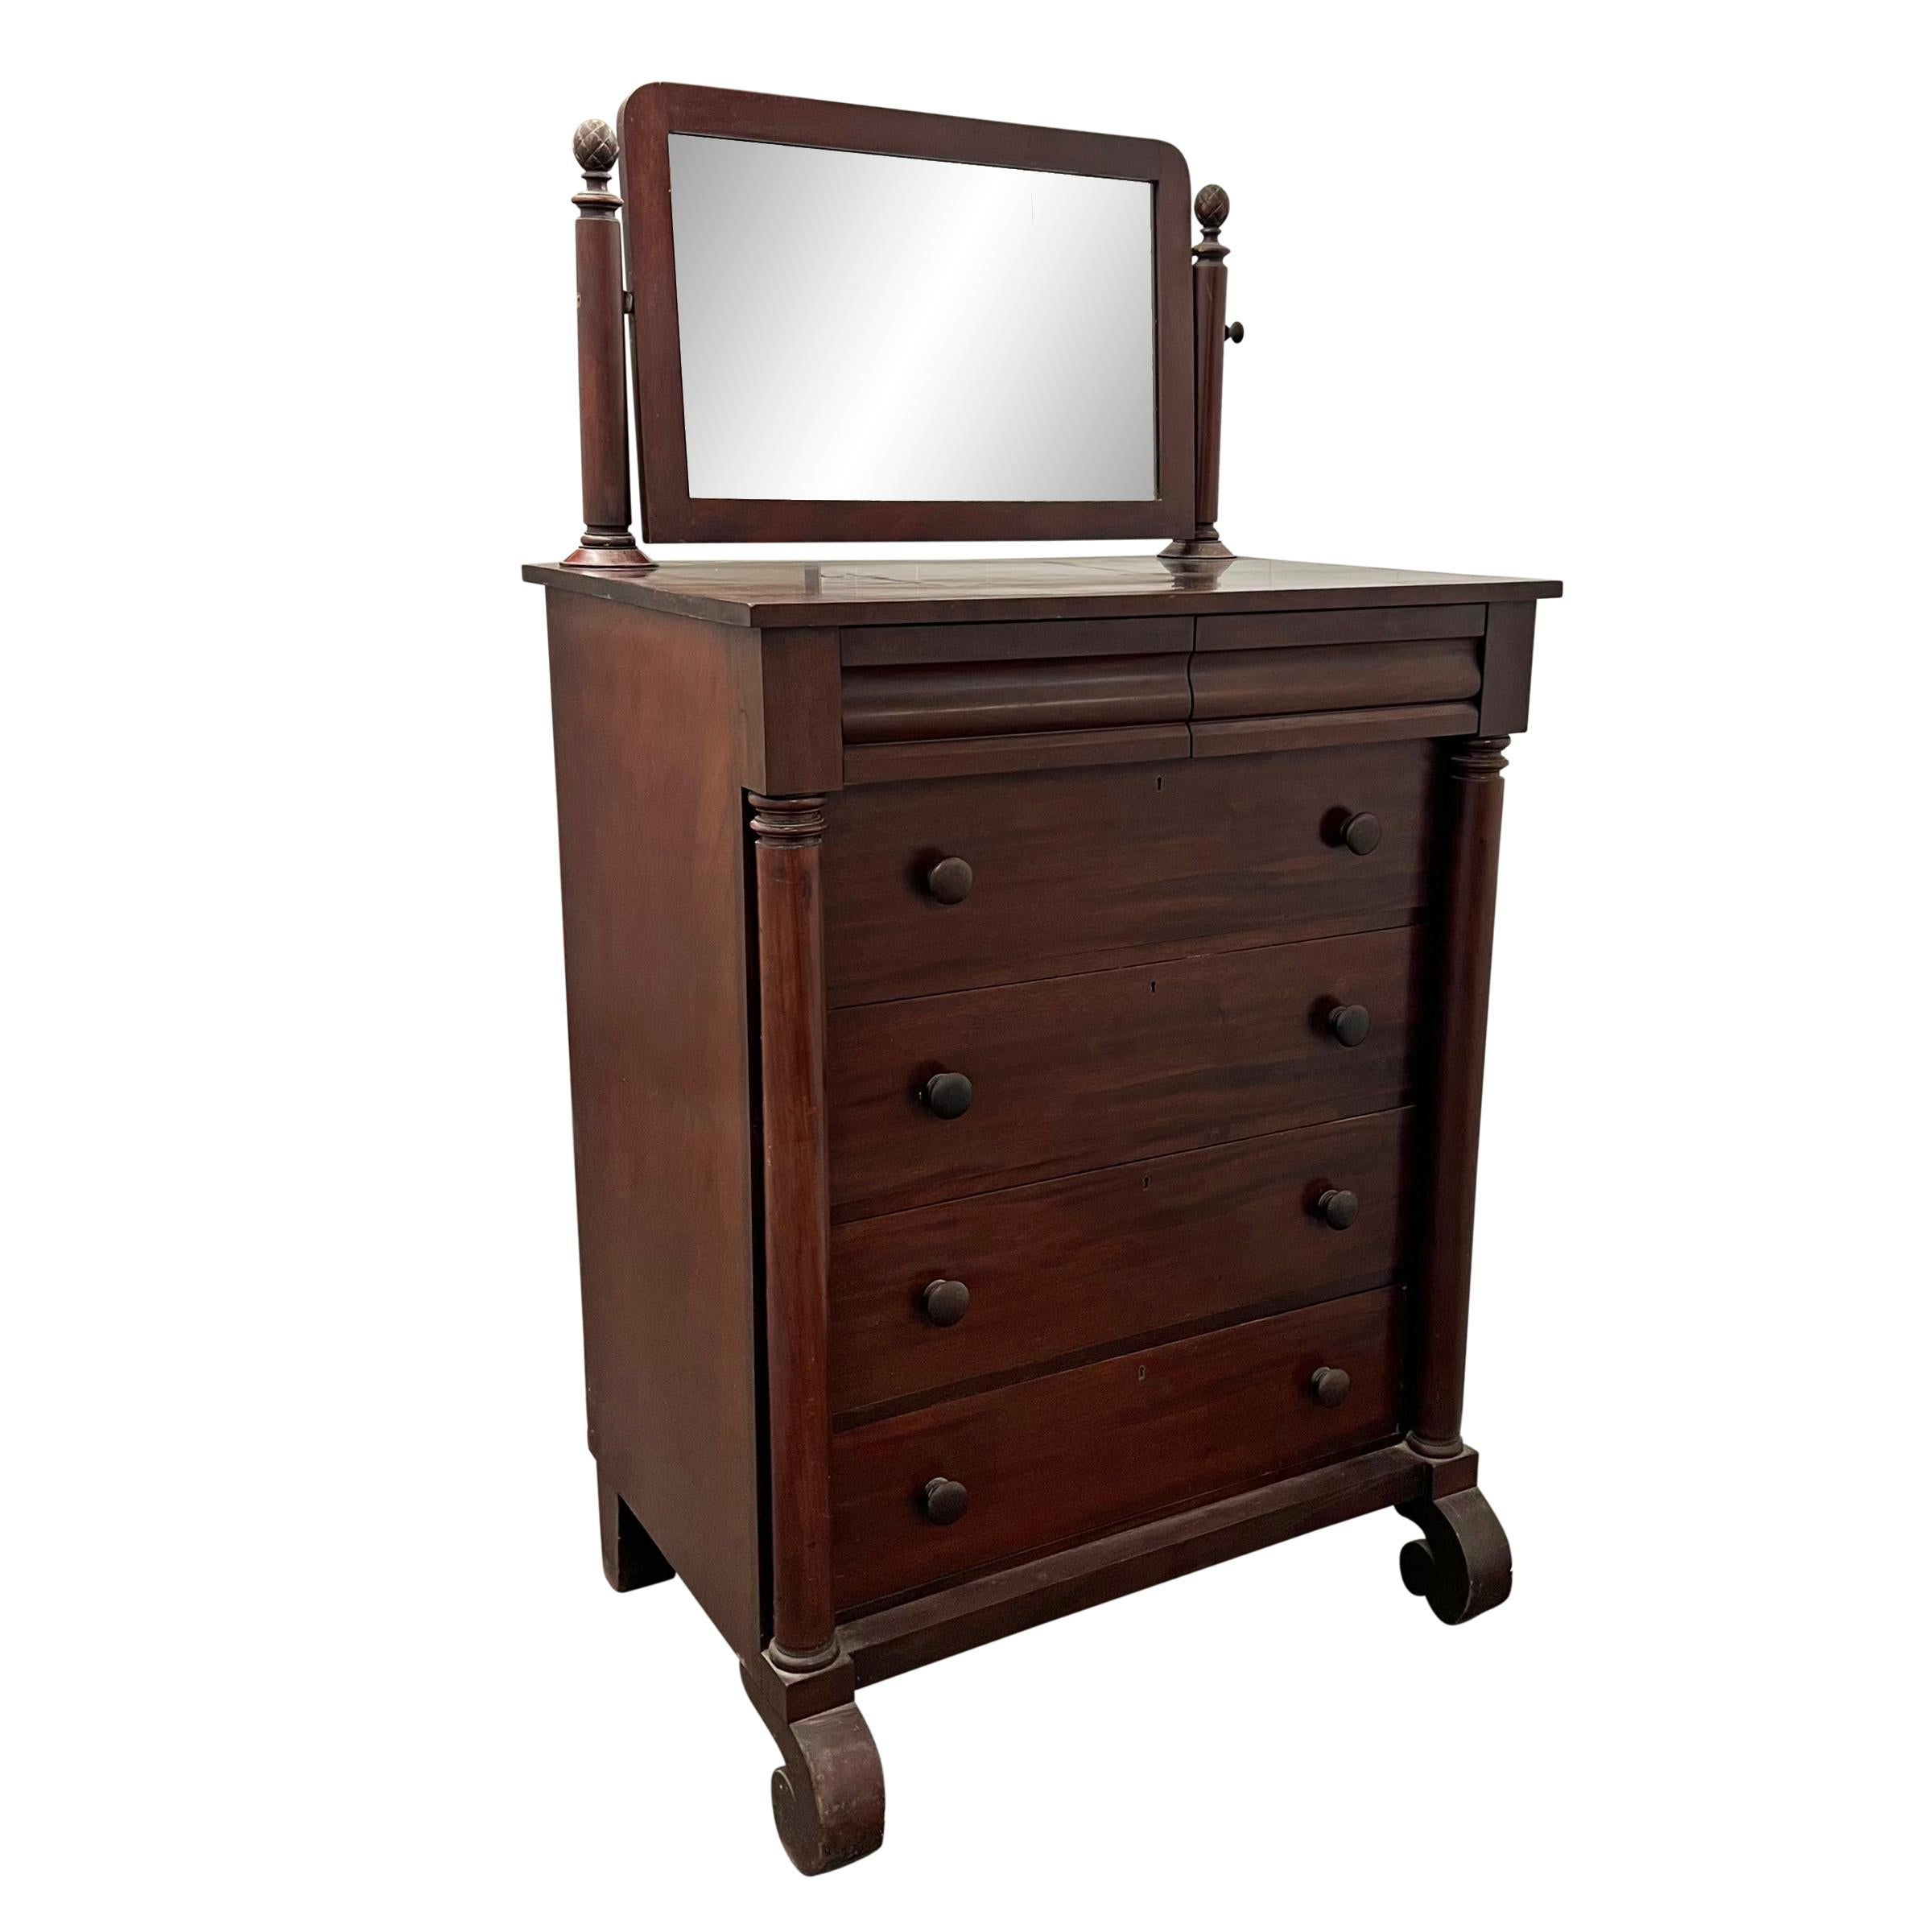 Veneer Late 19th Century American Empire Chest of Drawers with Mirror For Sale